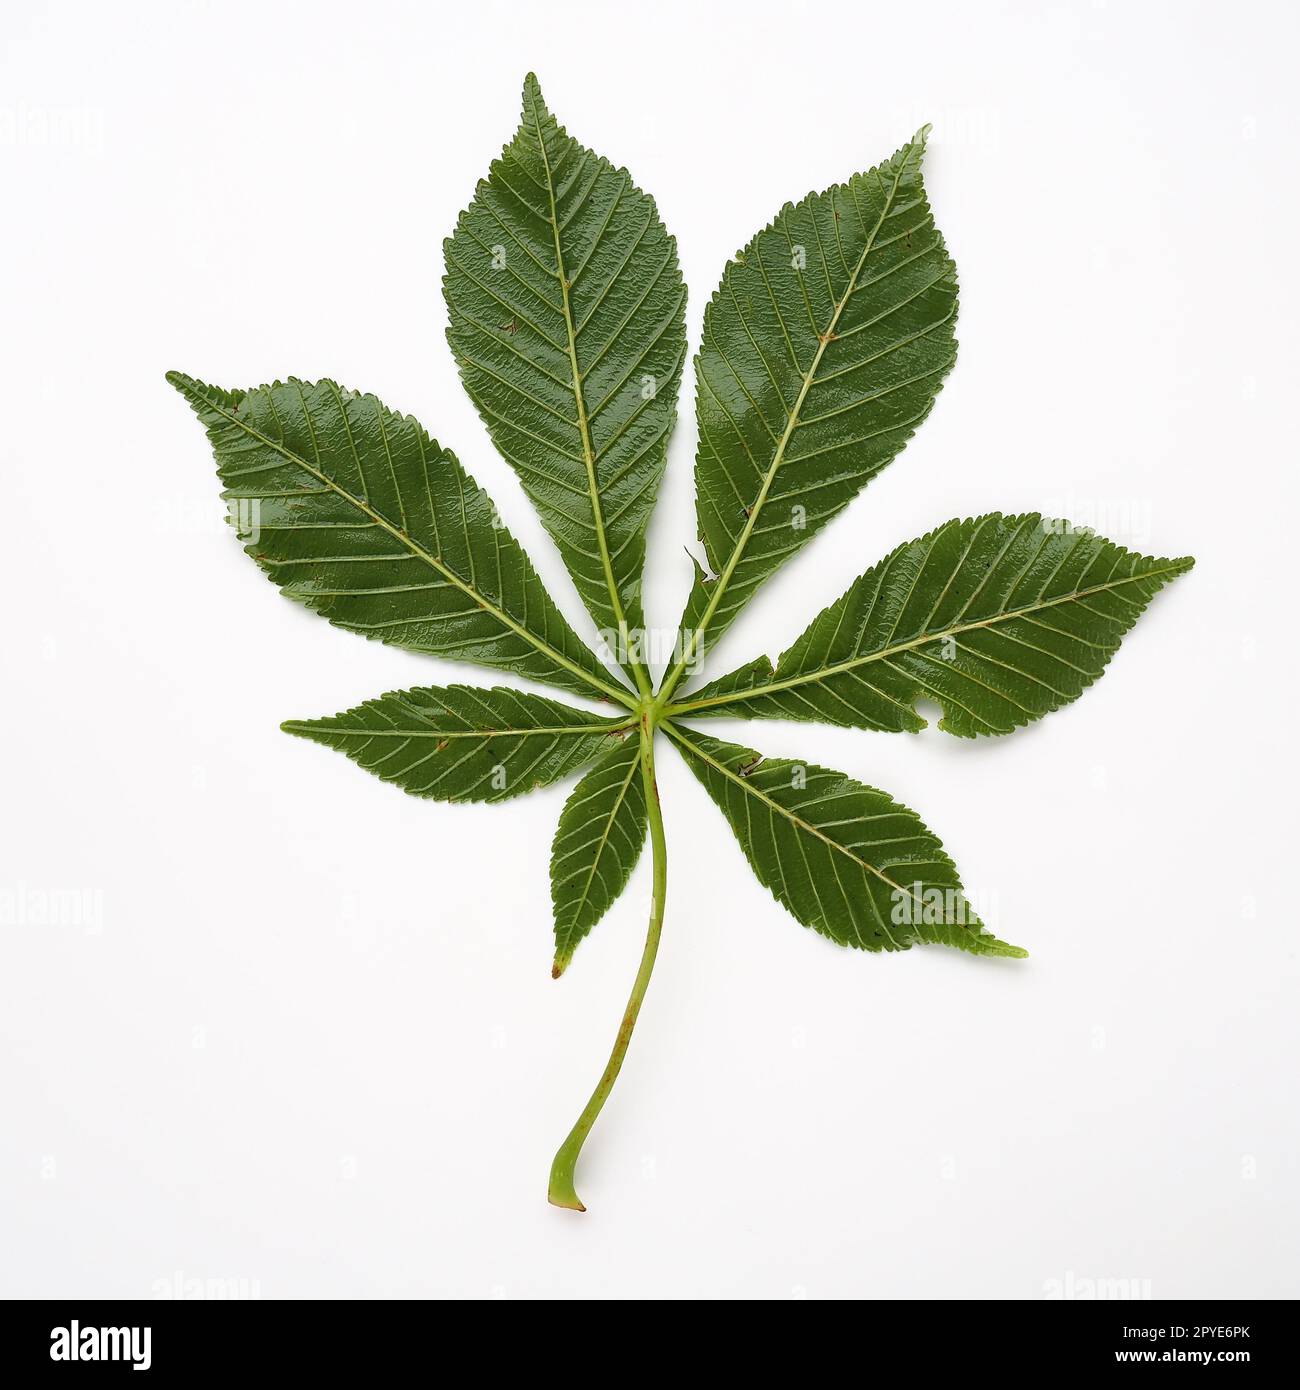 Chestnut leaf on a white background. The leaves are large, 7 - palmate, opposite, with long petioles. Horse chestnut, acorn, esculus Aesculus, a genus of plants in the Sapindaceae family Sapindaceae. Stock Photo